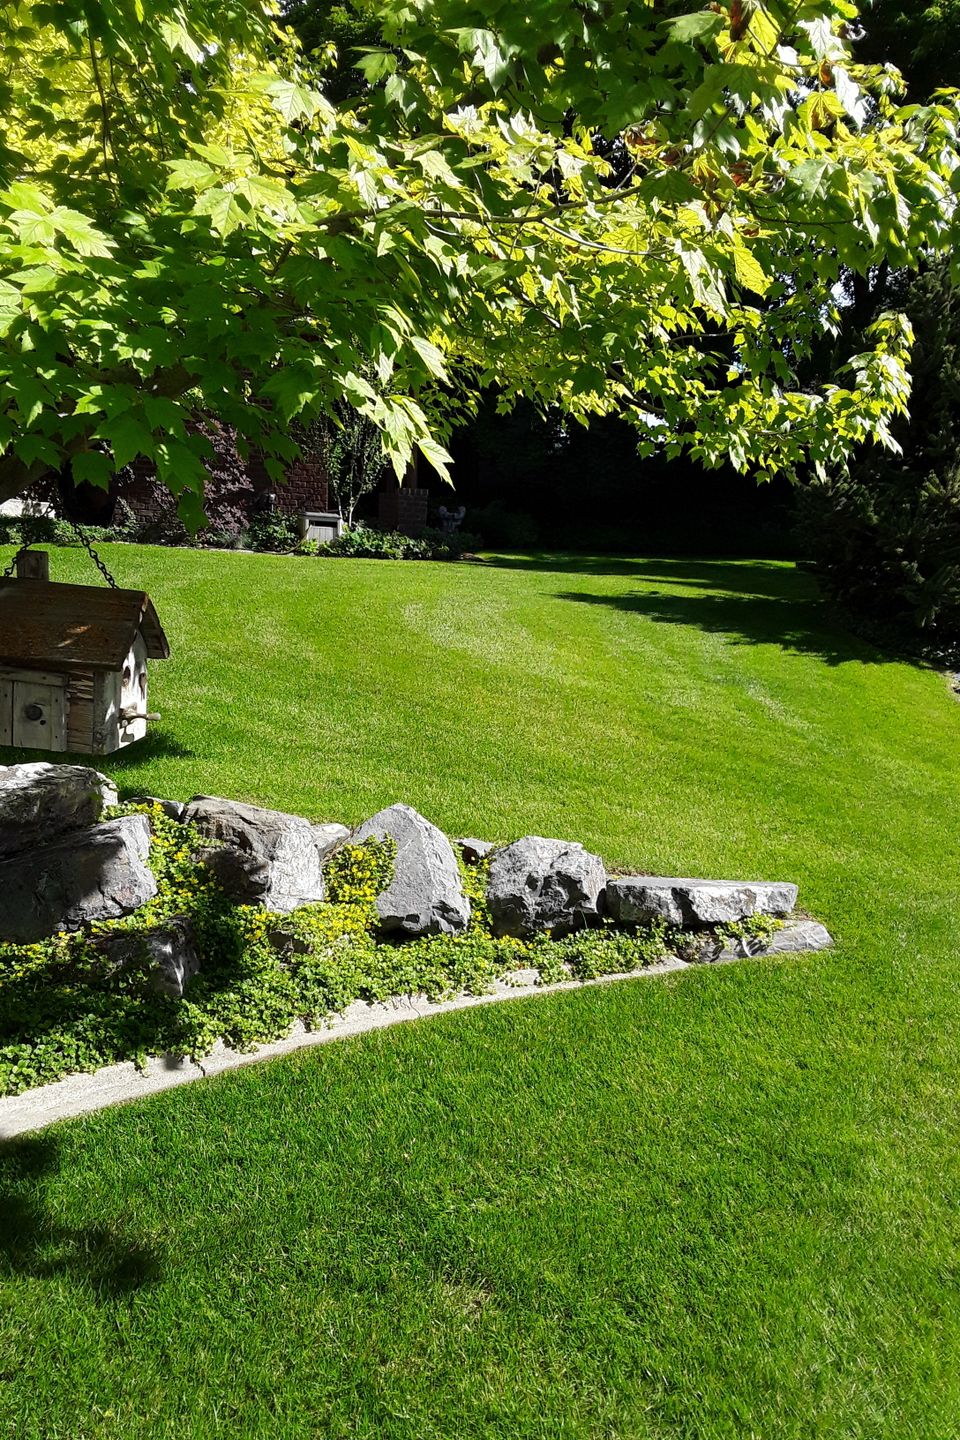 Lawn Care Experts Give Lawn Treatment, Fall & Spring Yard Clean-Up in Murray Utah